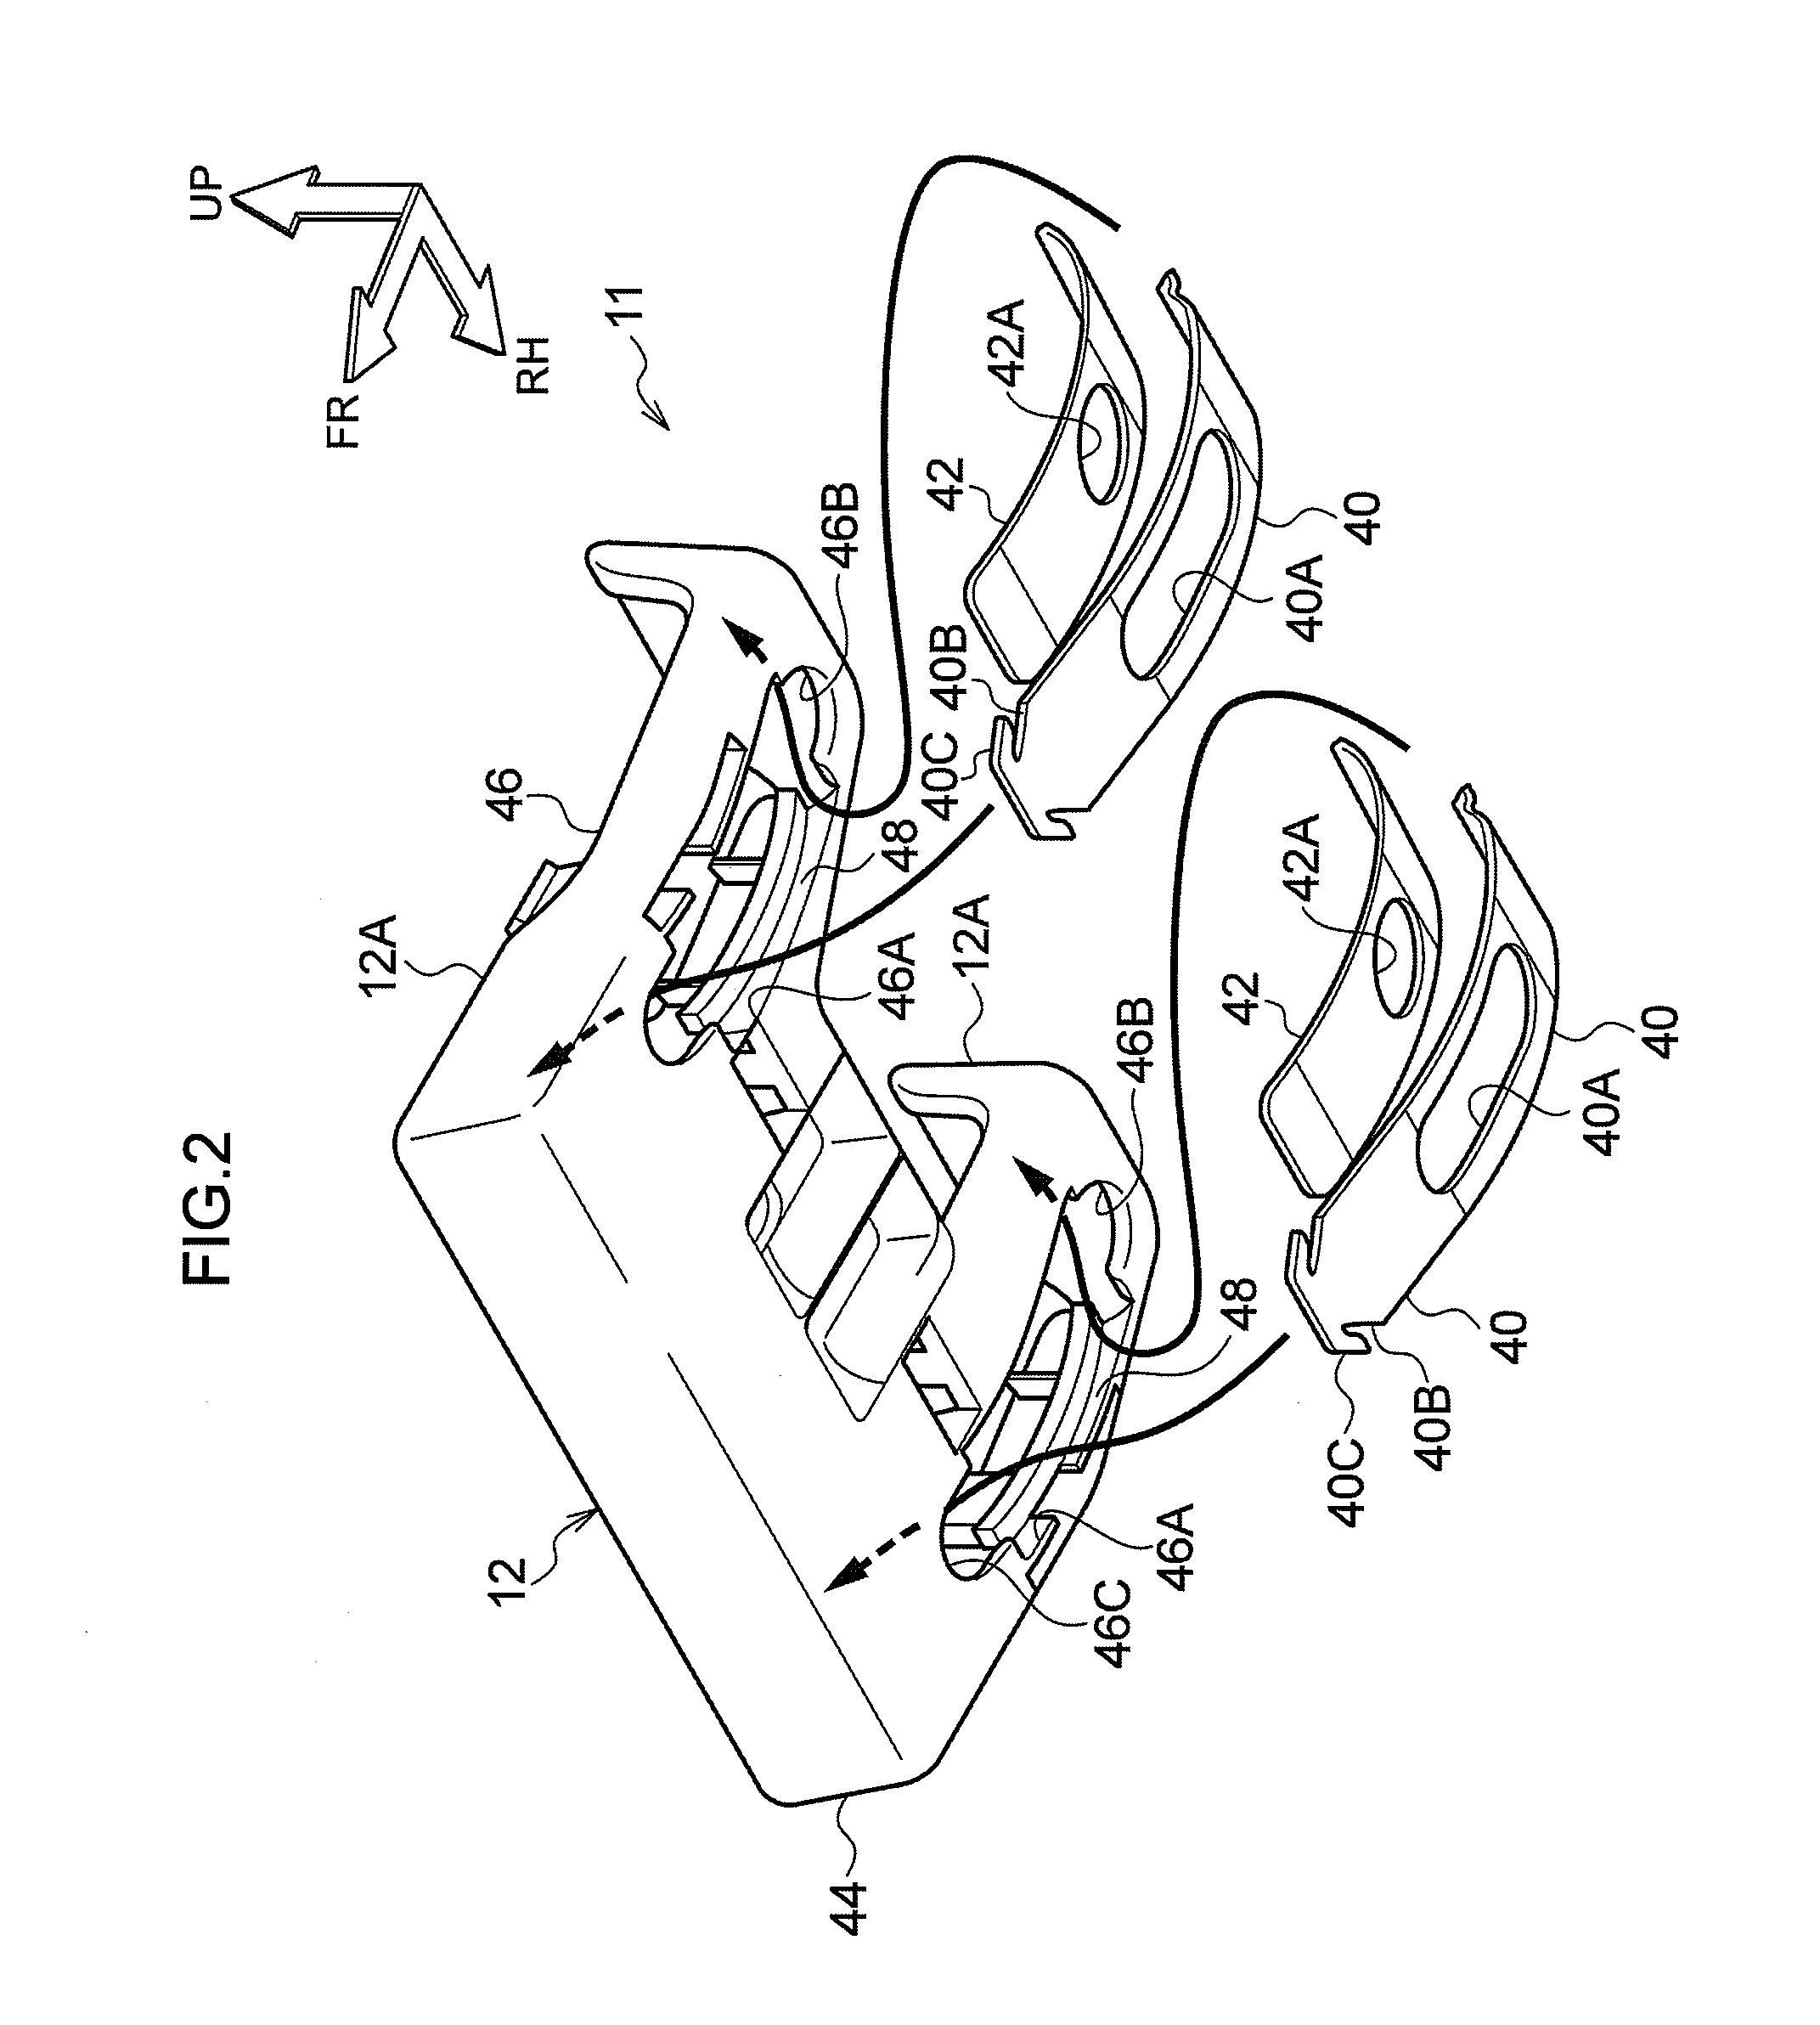 Headrest structure and headrest device